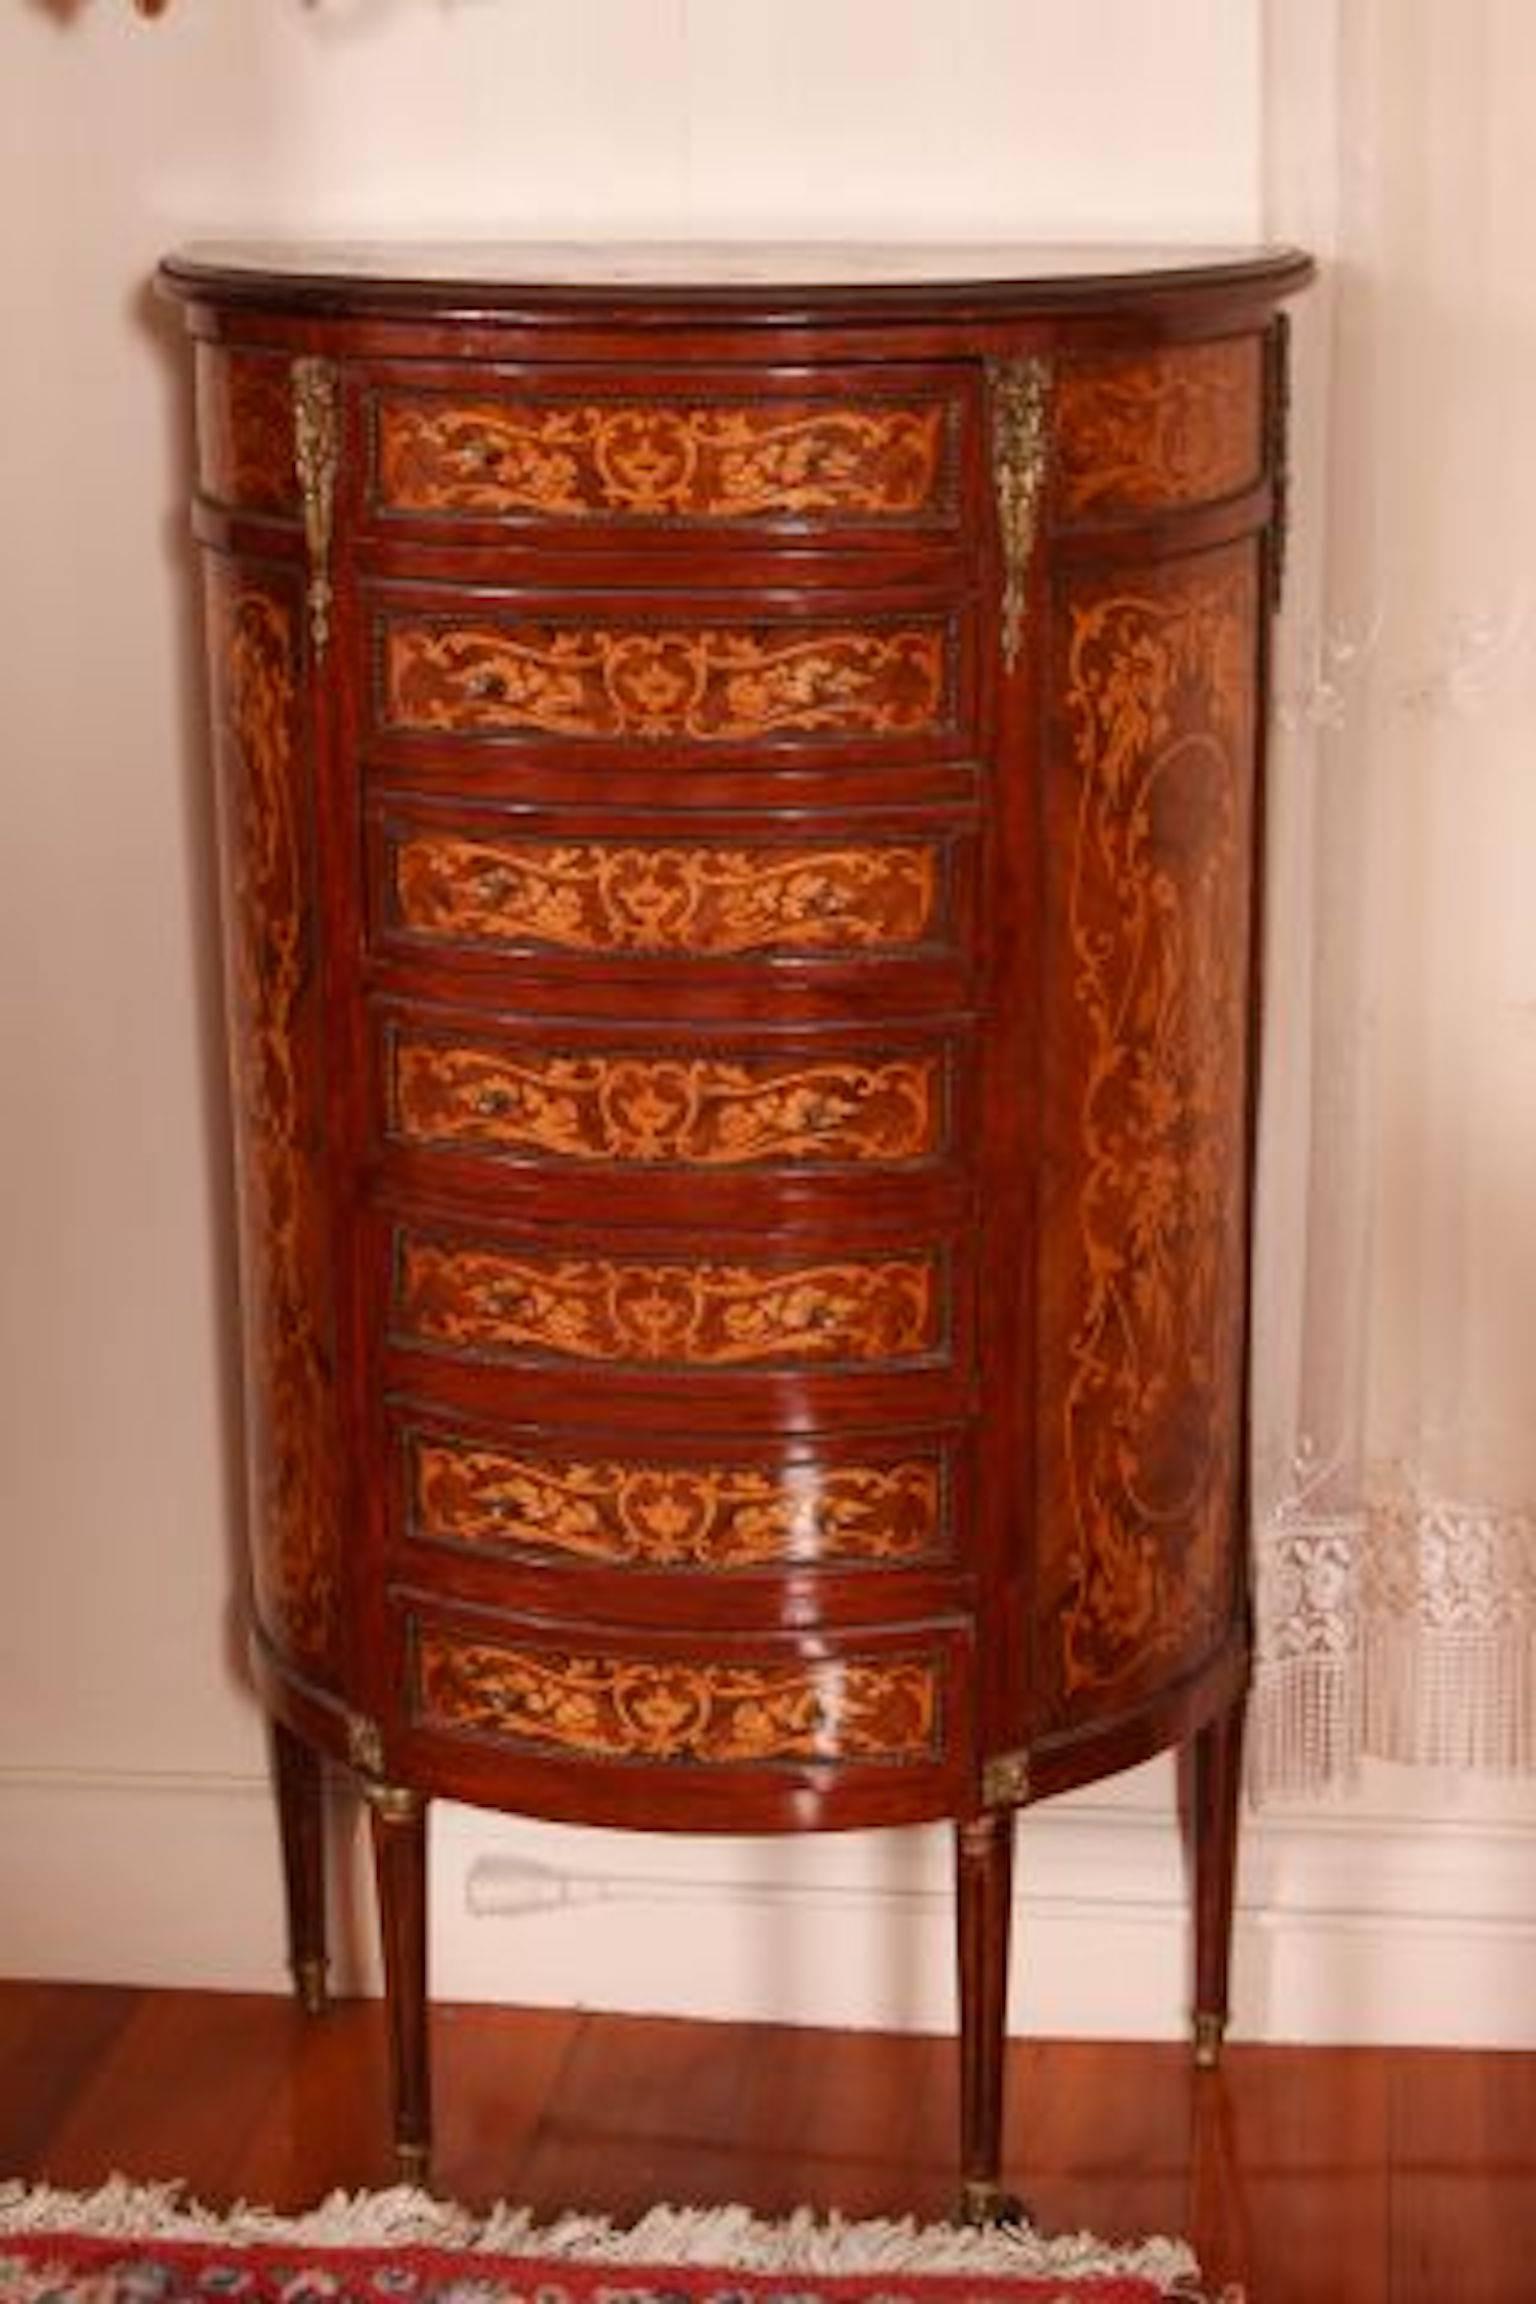 19th century French seven-drawer marquetry chest with ormolu decoration. Measures: 48